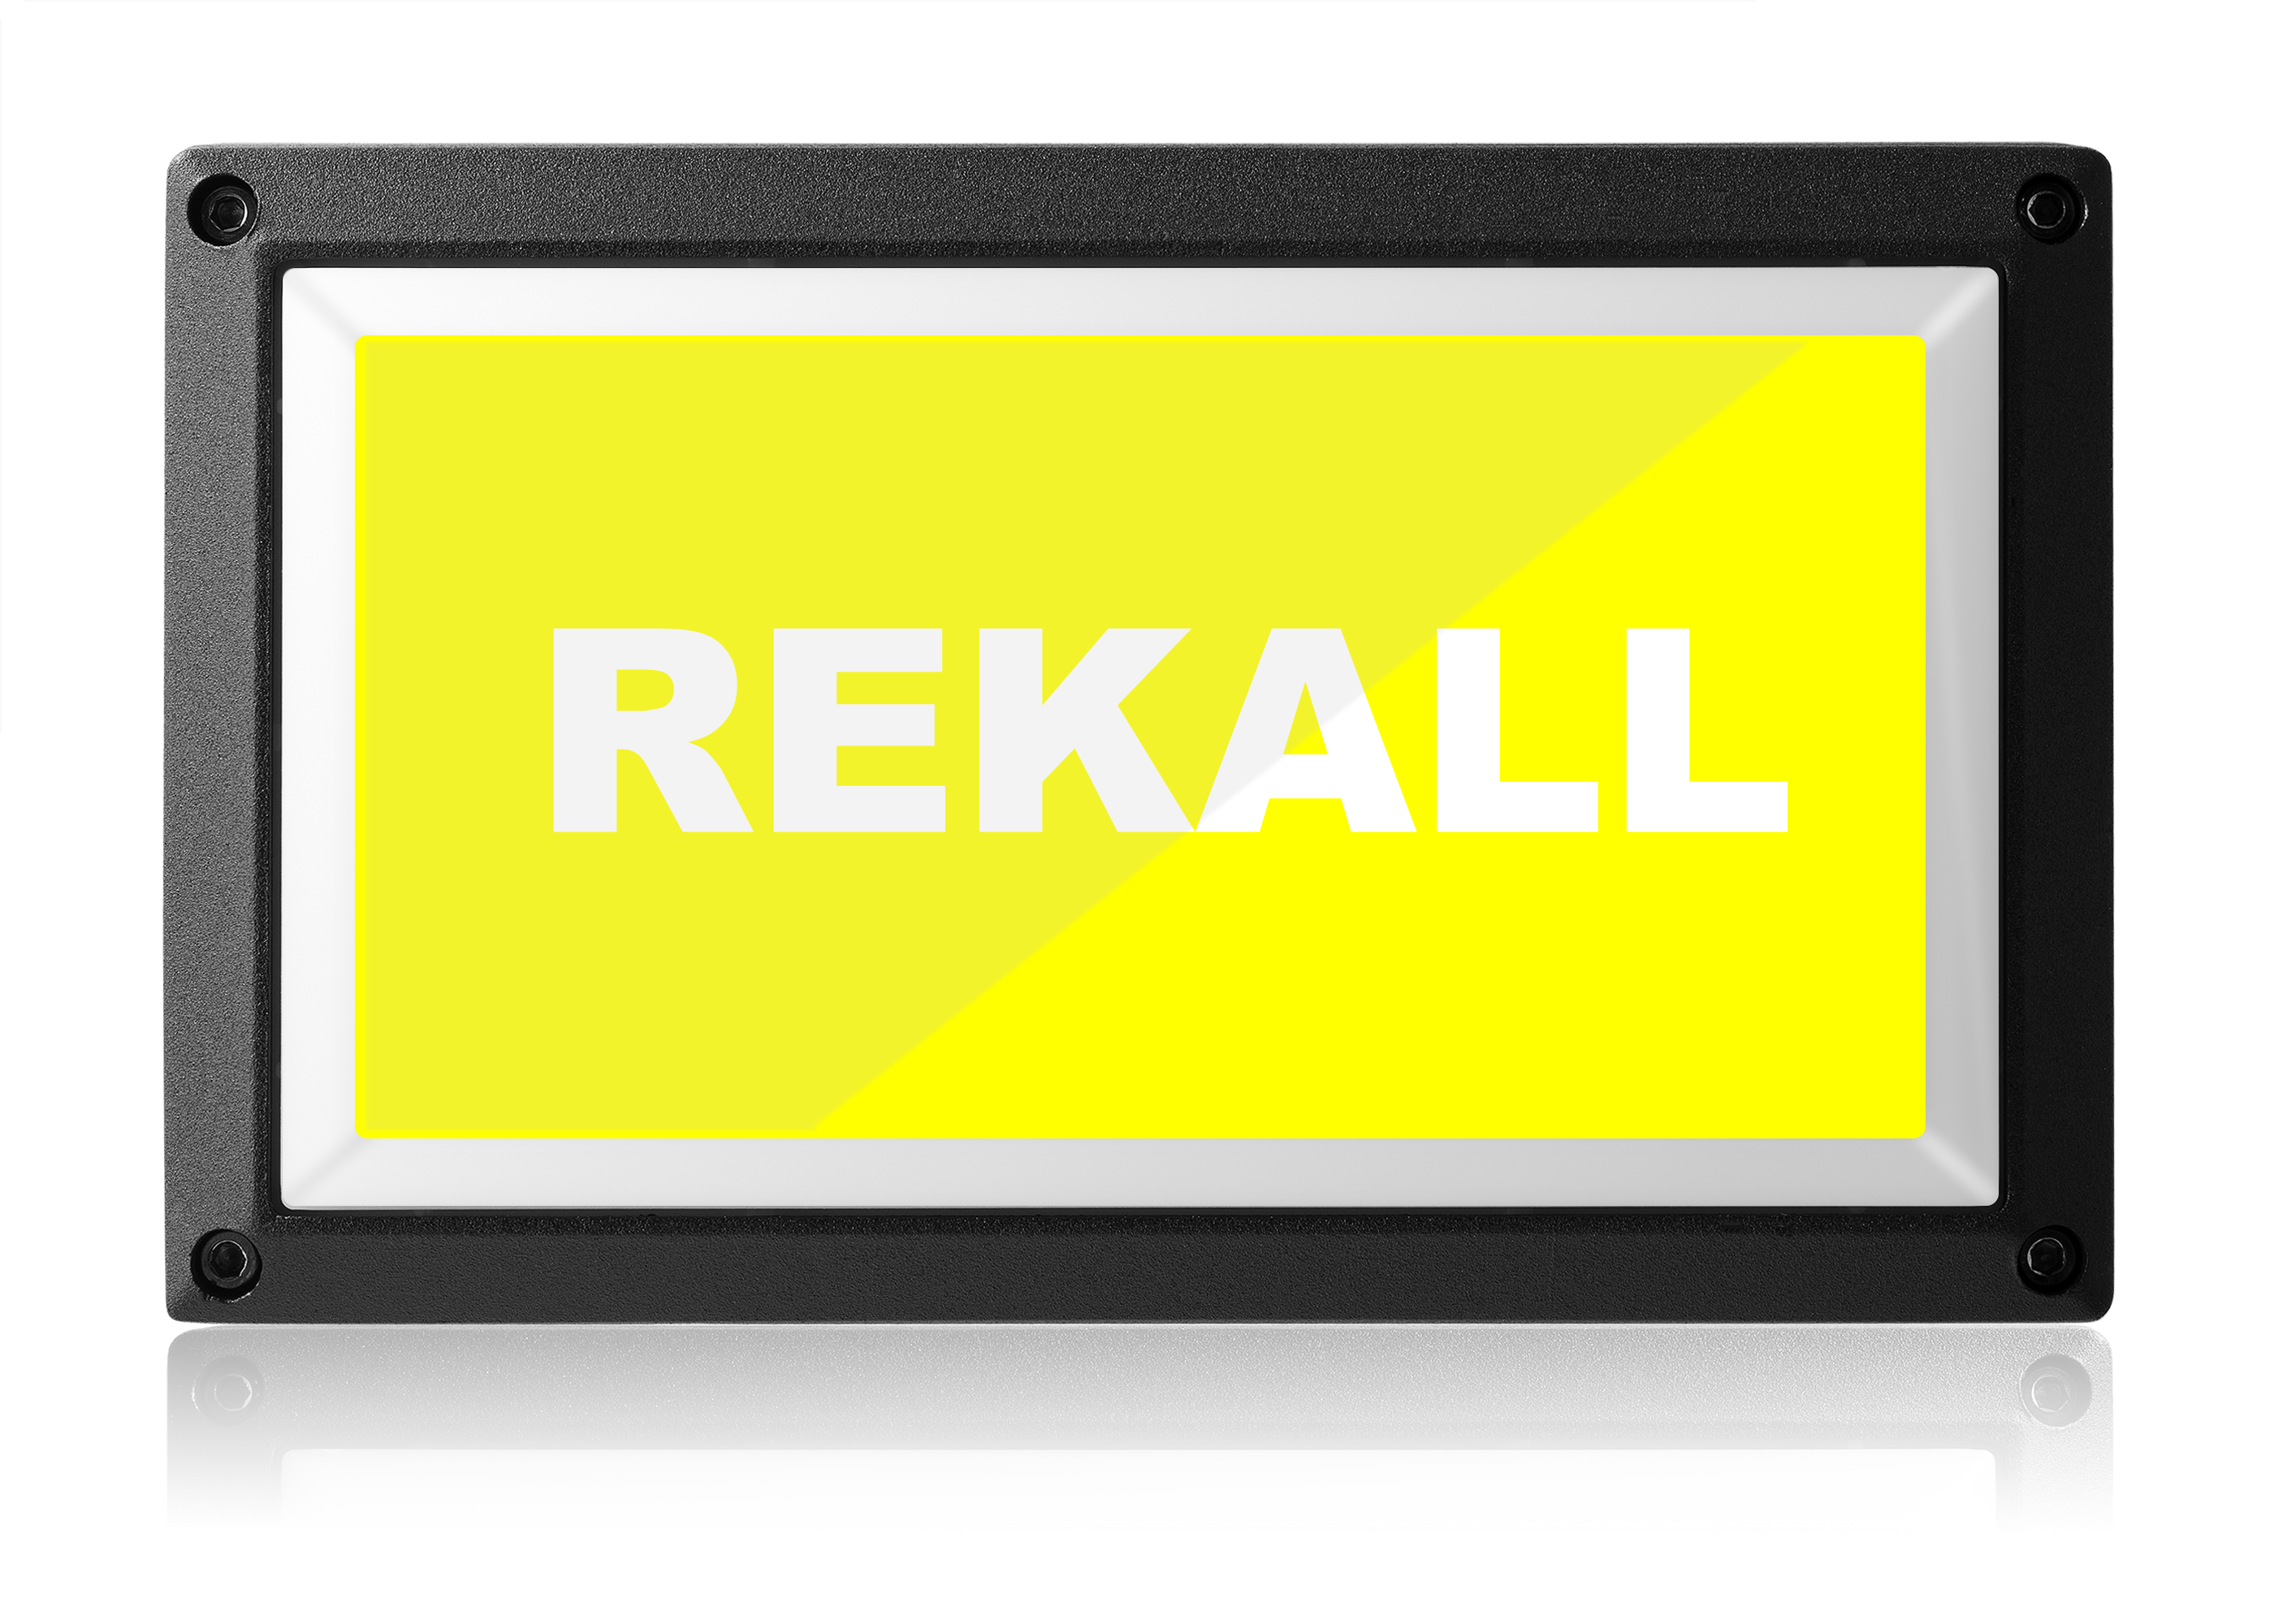 Limited Distribution In Use - LIMDIS - Rekall Dynamics LED Sign-